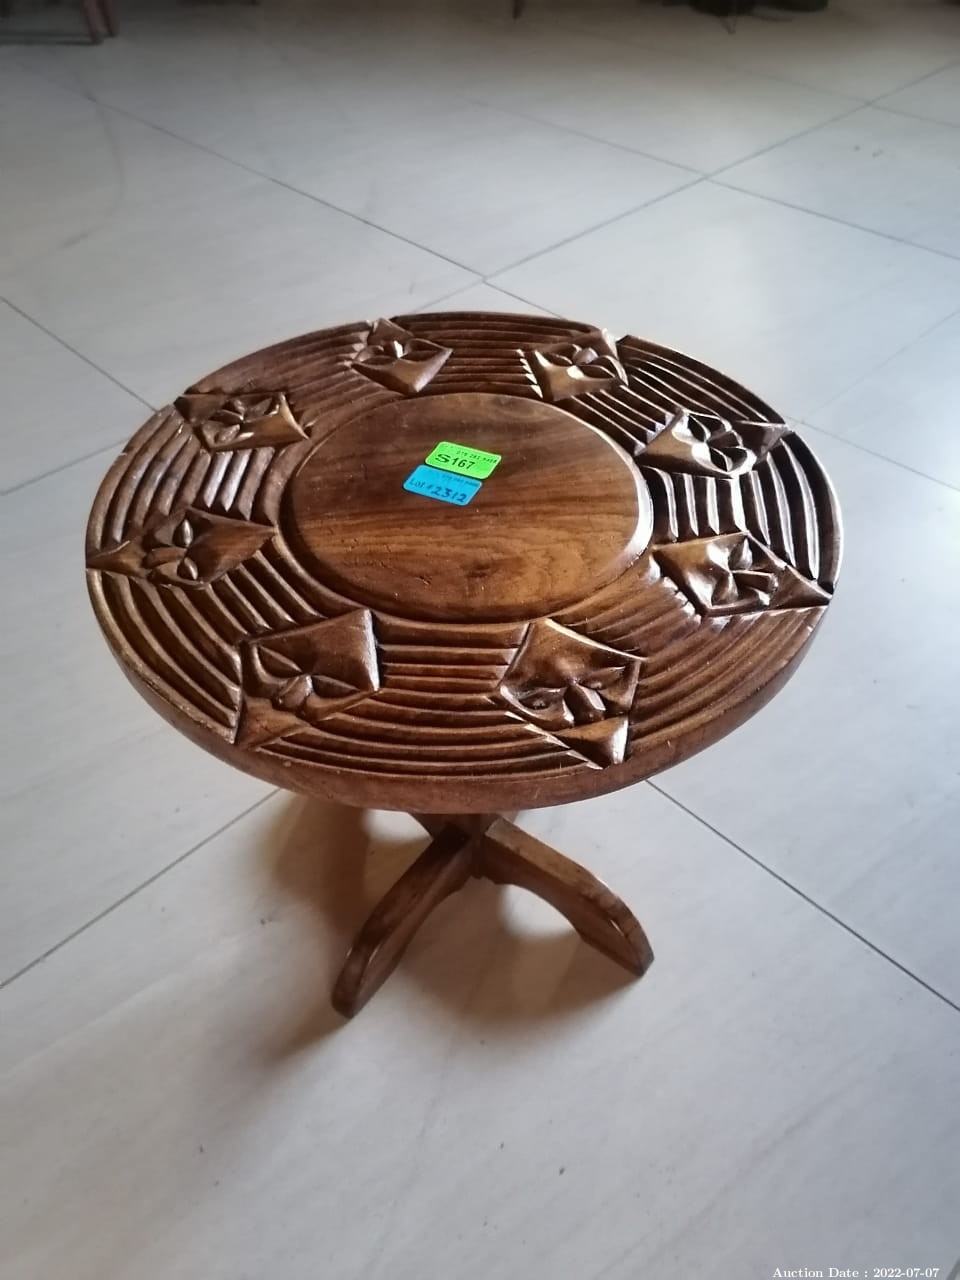 2312 - Small Round Side Table Solid Wood with Carving Details